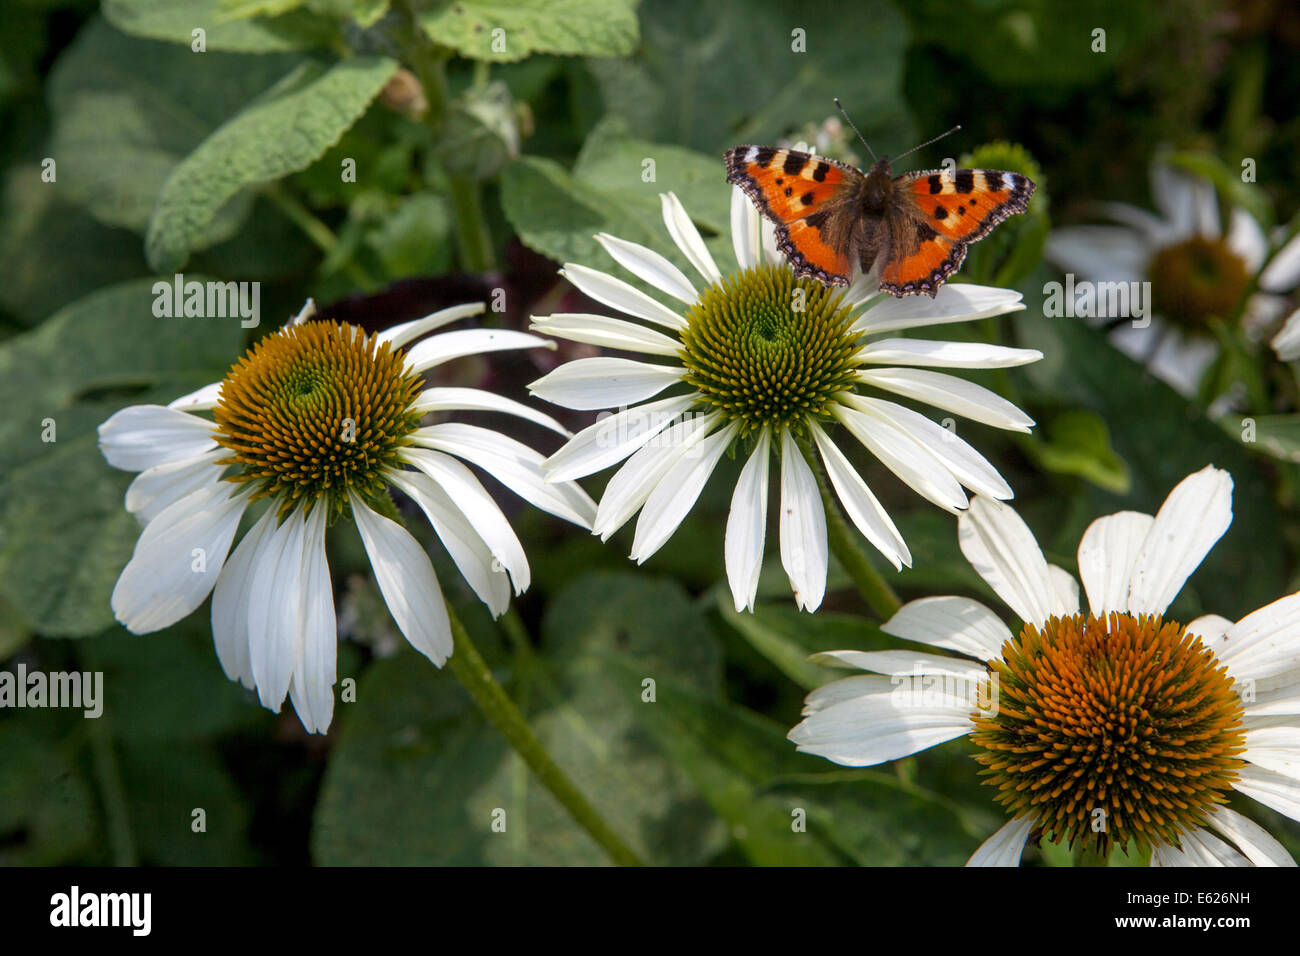 Echinacea 'White Swan' with a butterfly on a flower Echinacea purpurea 'White Swan' White Coneflower, Stock Photo